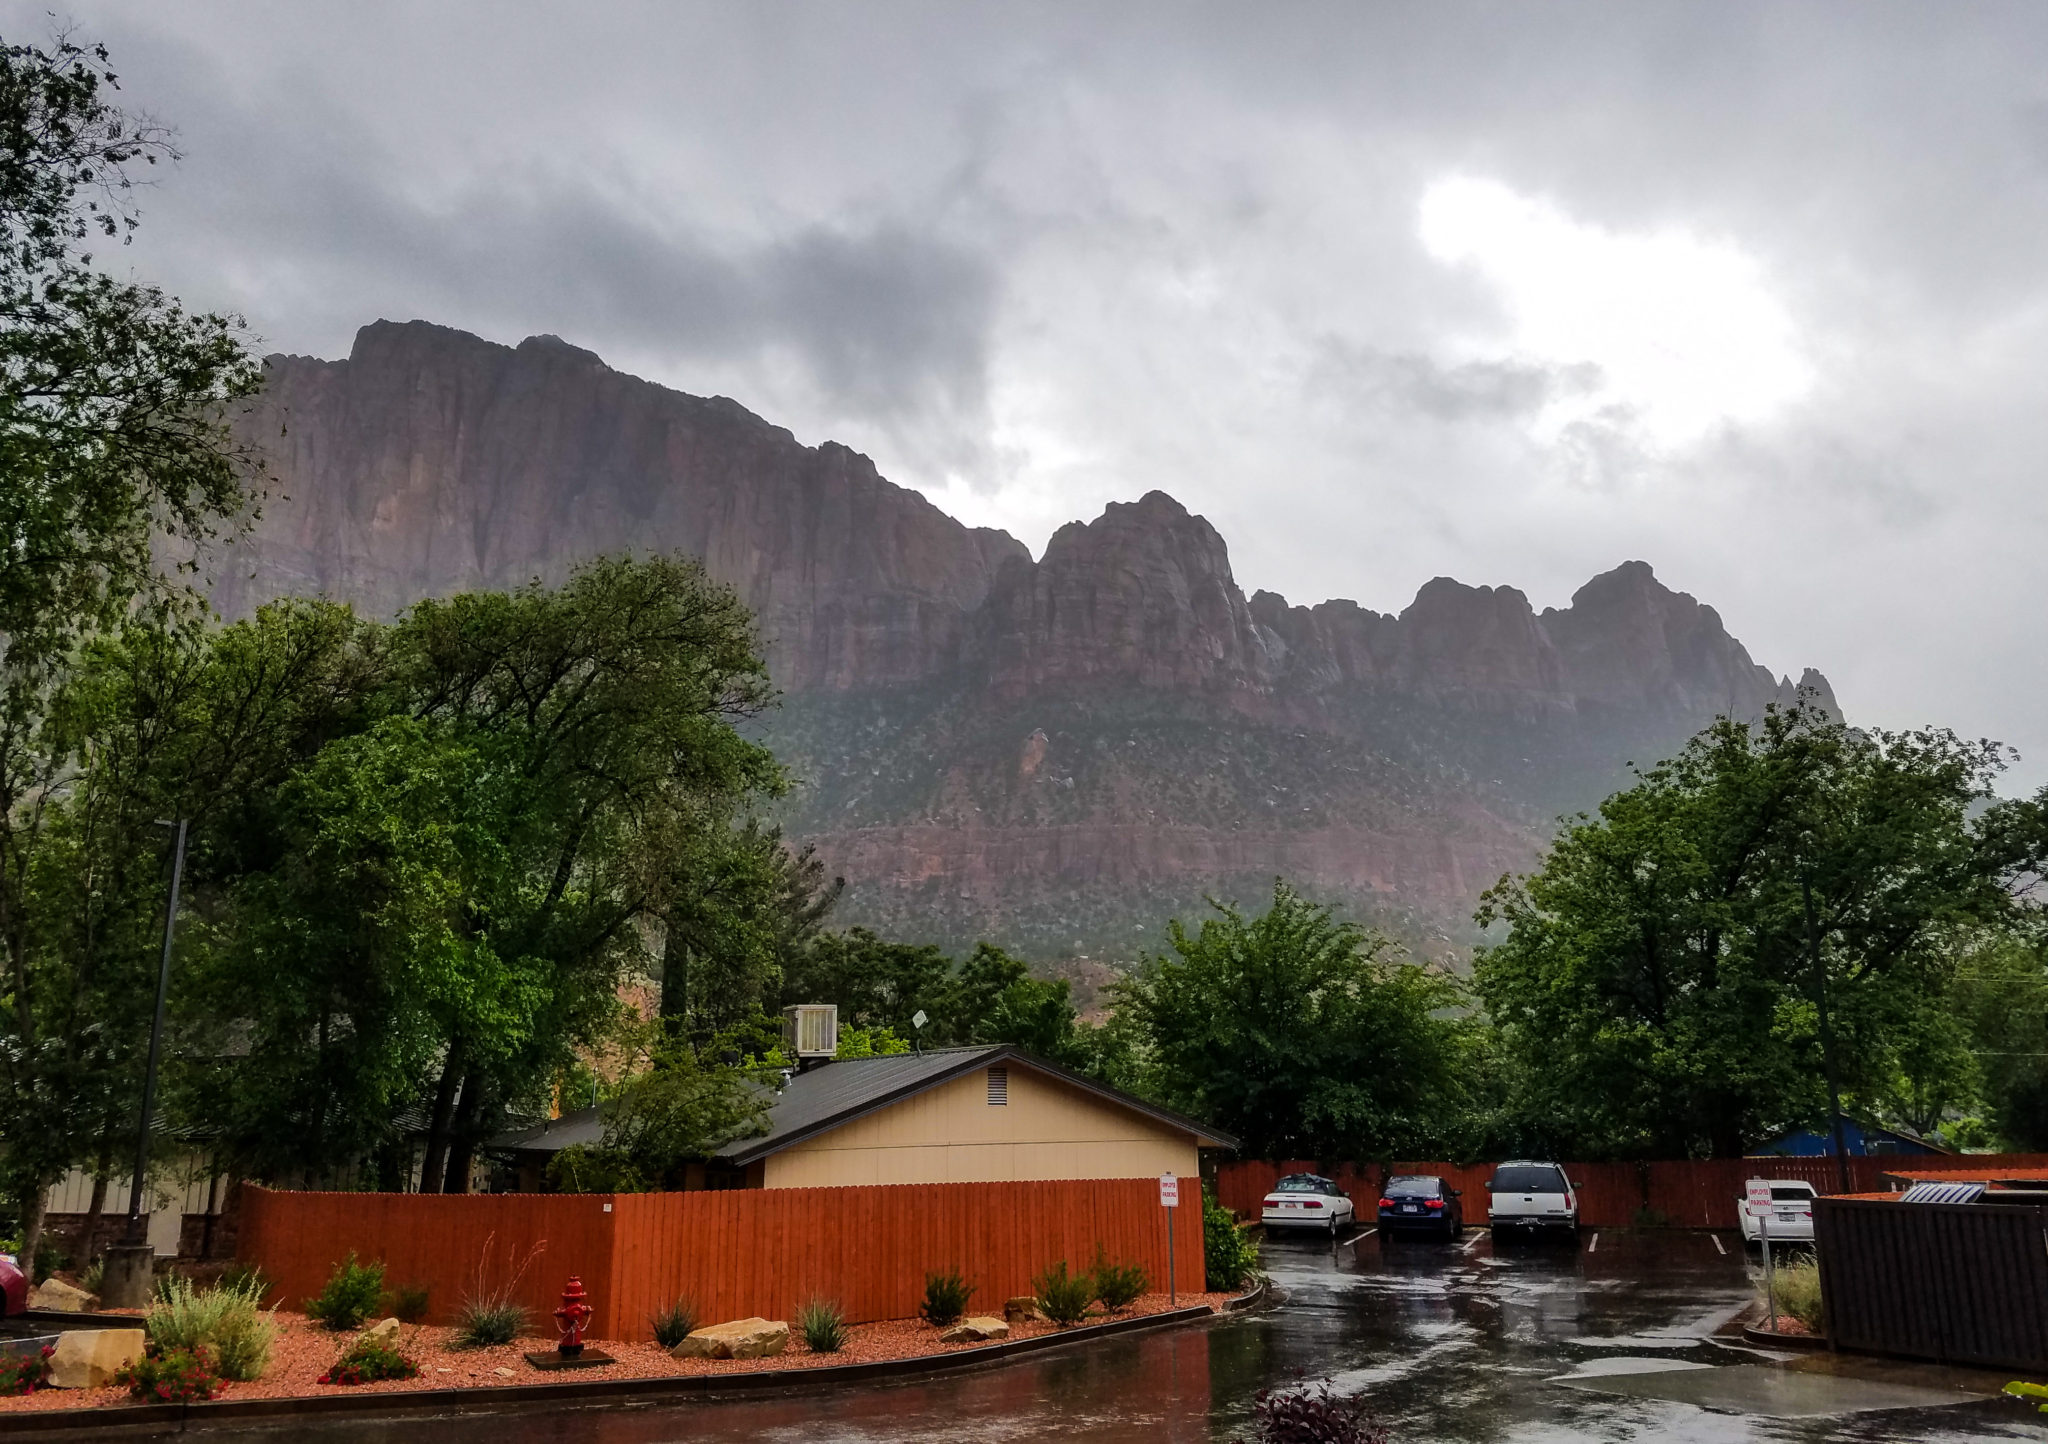 A view from our hotel patio. Even in the rain with overcast skies, Zion National Park looks amazing!